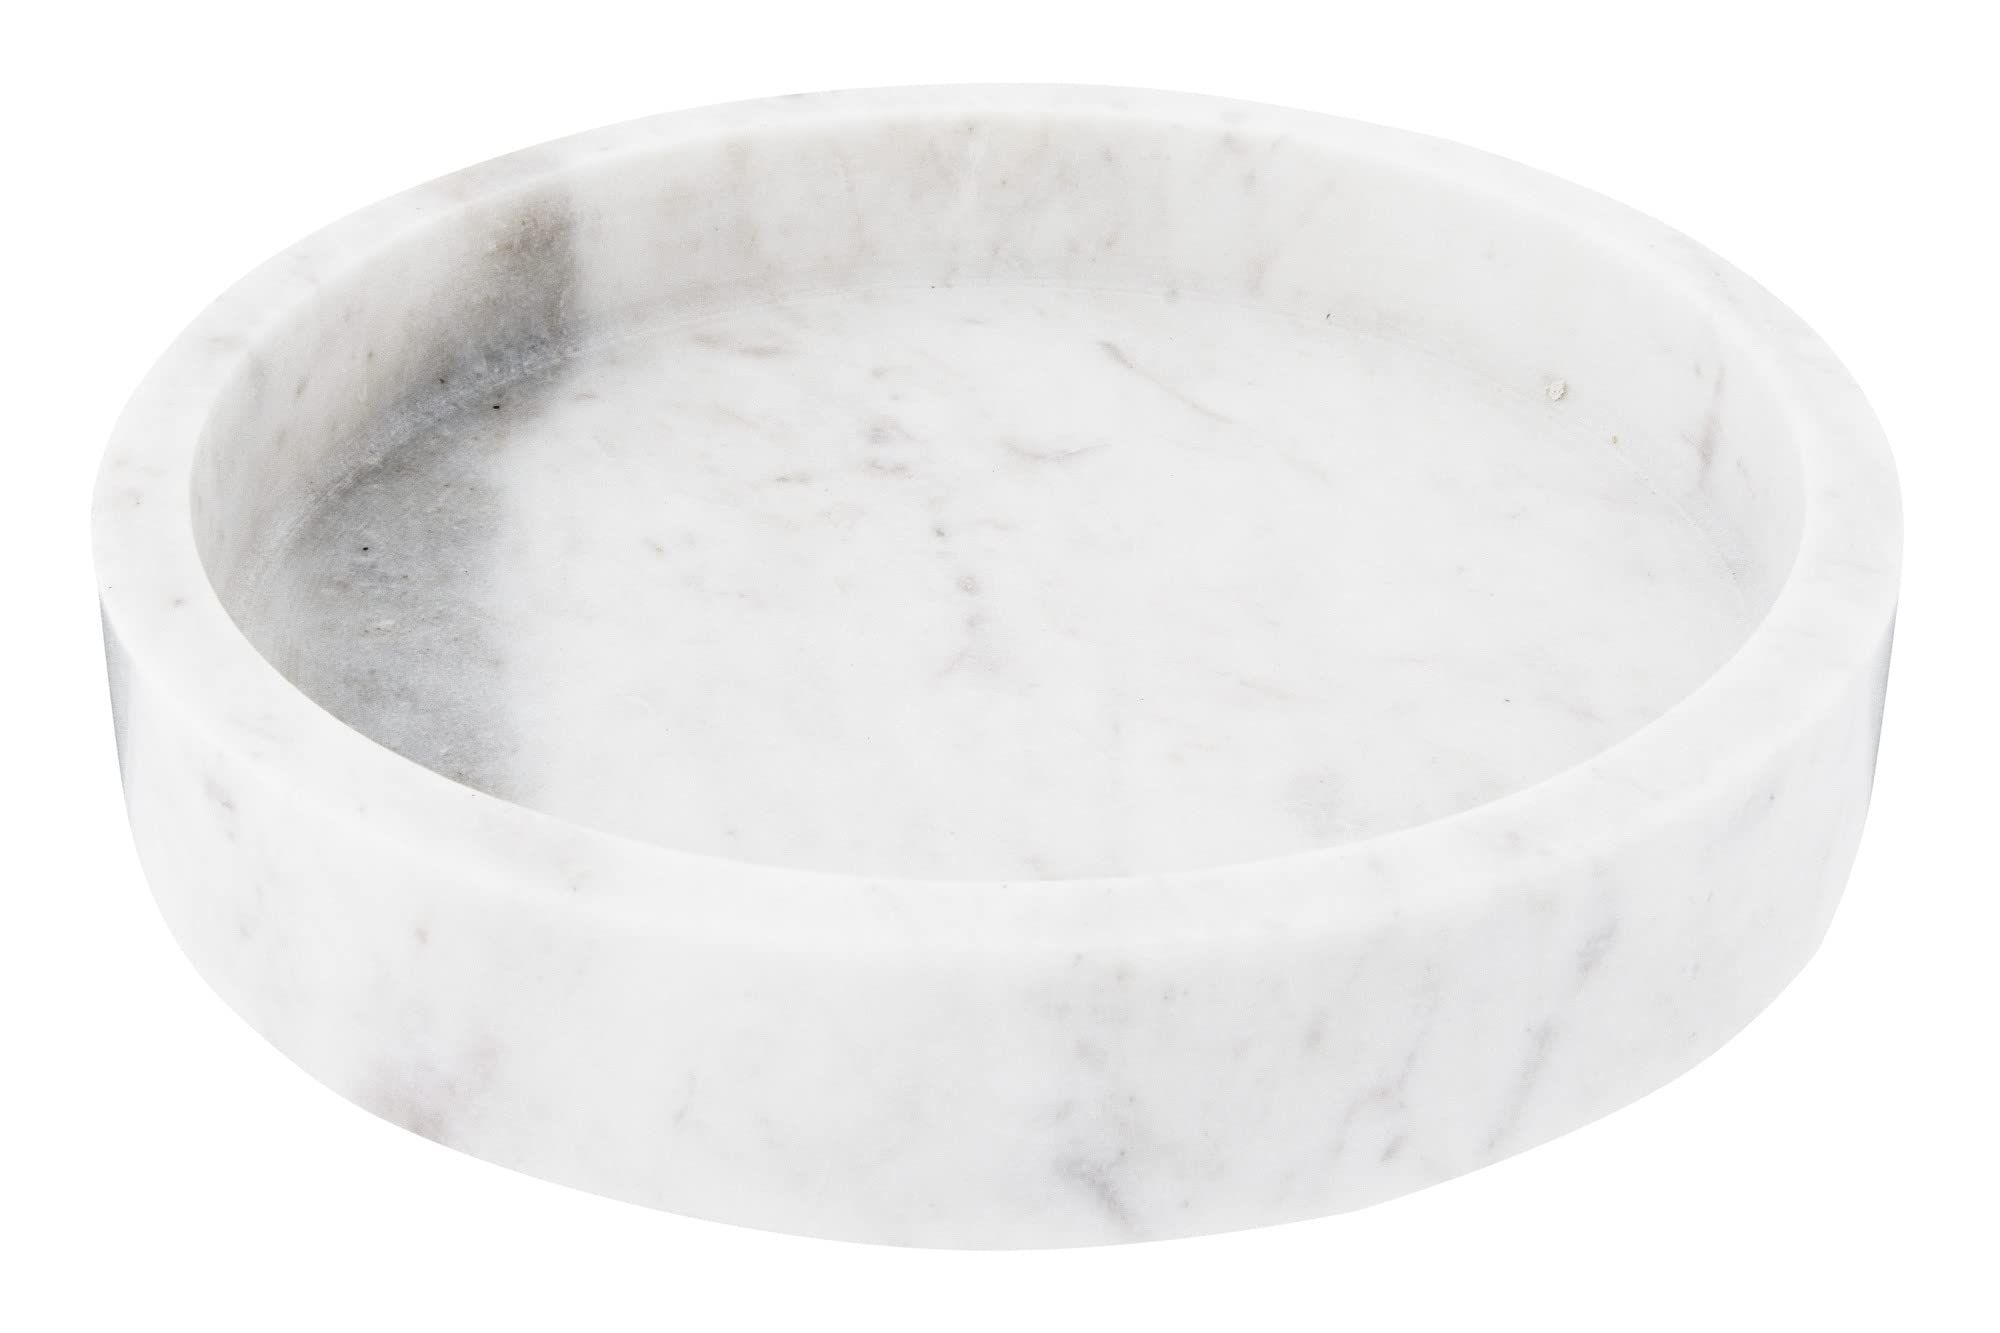 Creative Co-Op Minimalist Round Carved Marble Tray or Charcuterie Board, White | Amazon (US)